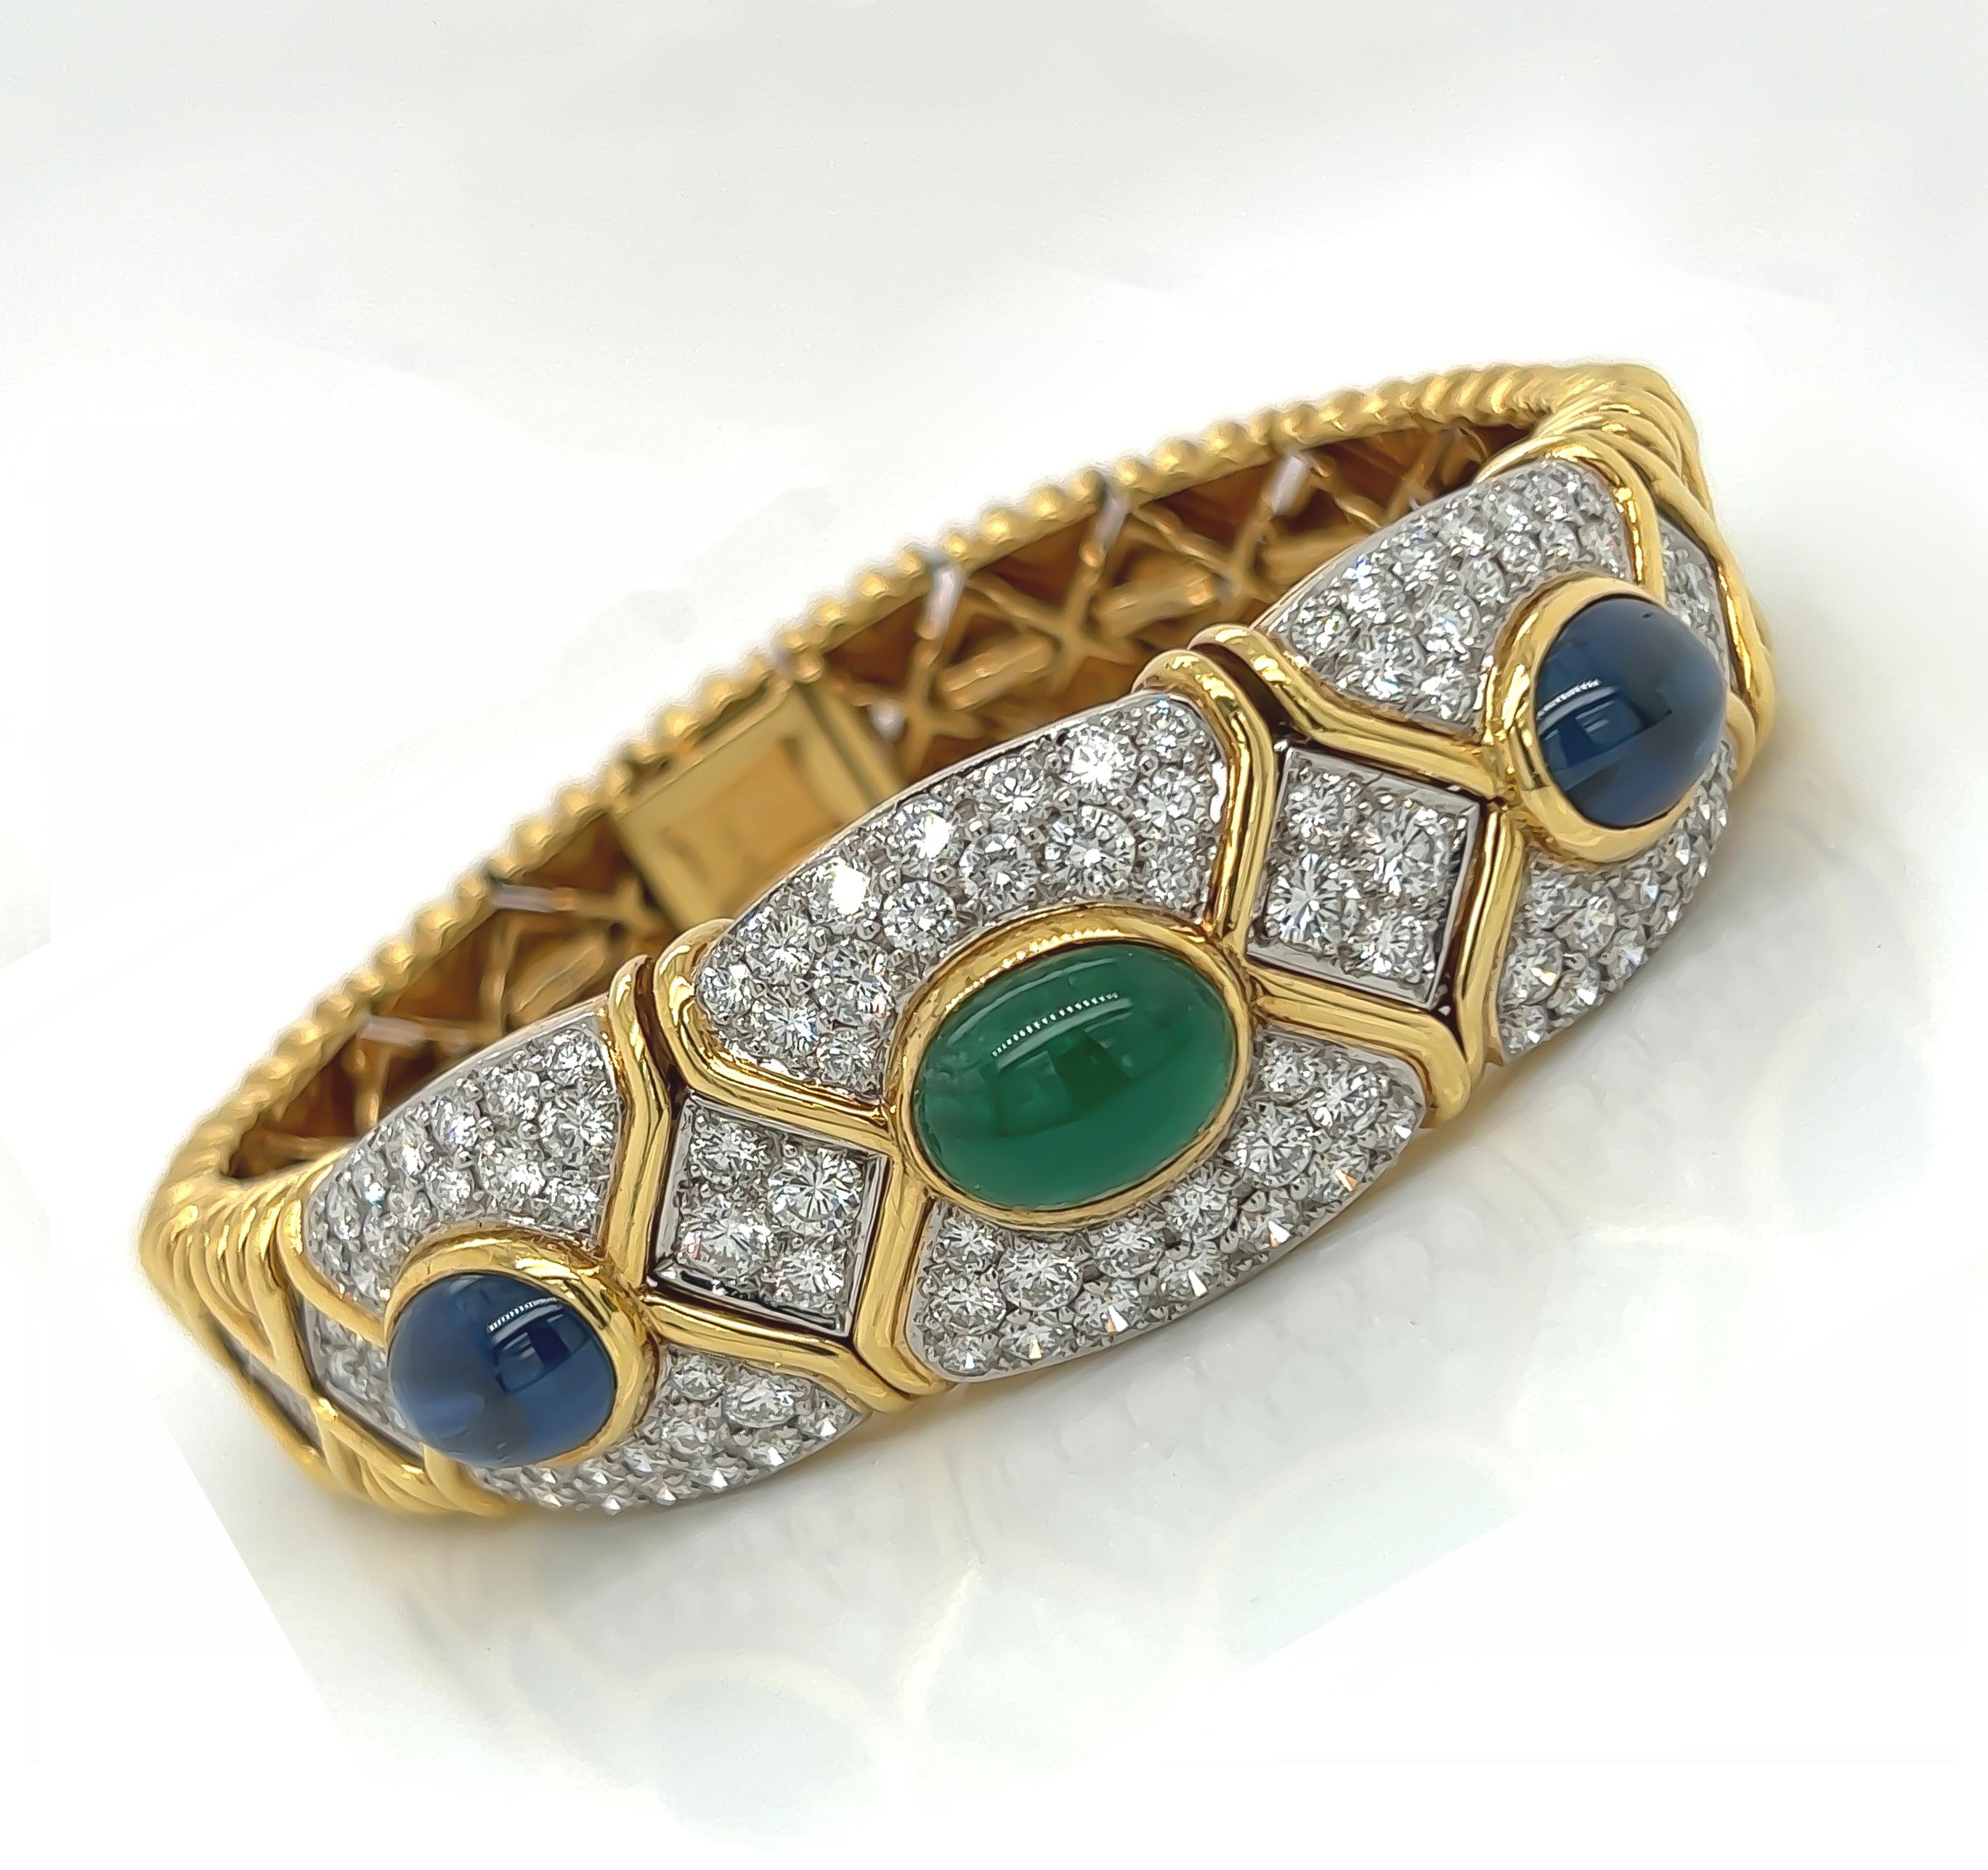 Sapphire, Emerald and Diamond Multi-Gemstone Bracelet in 18K Yellow Gold

This amazing bracelet features 9.95 carats of diamond, 7.25 carats of sapphire, and 4.55 carats of emerald, set into 72.2 grams of yellow gold. This is perfect as a glamorous